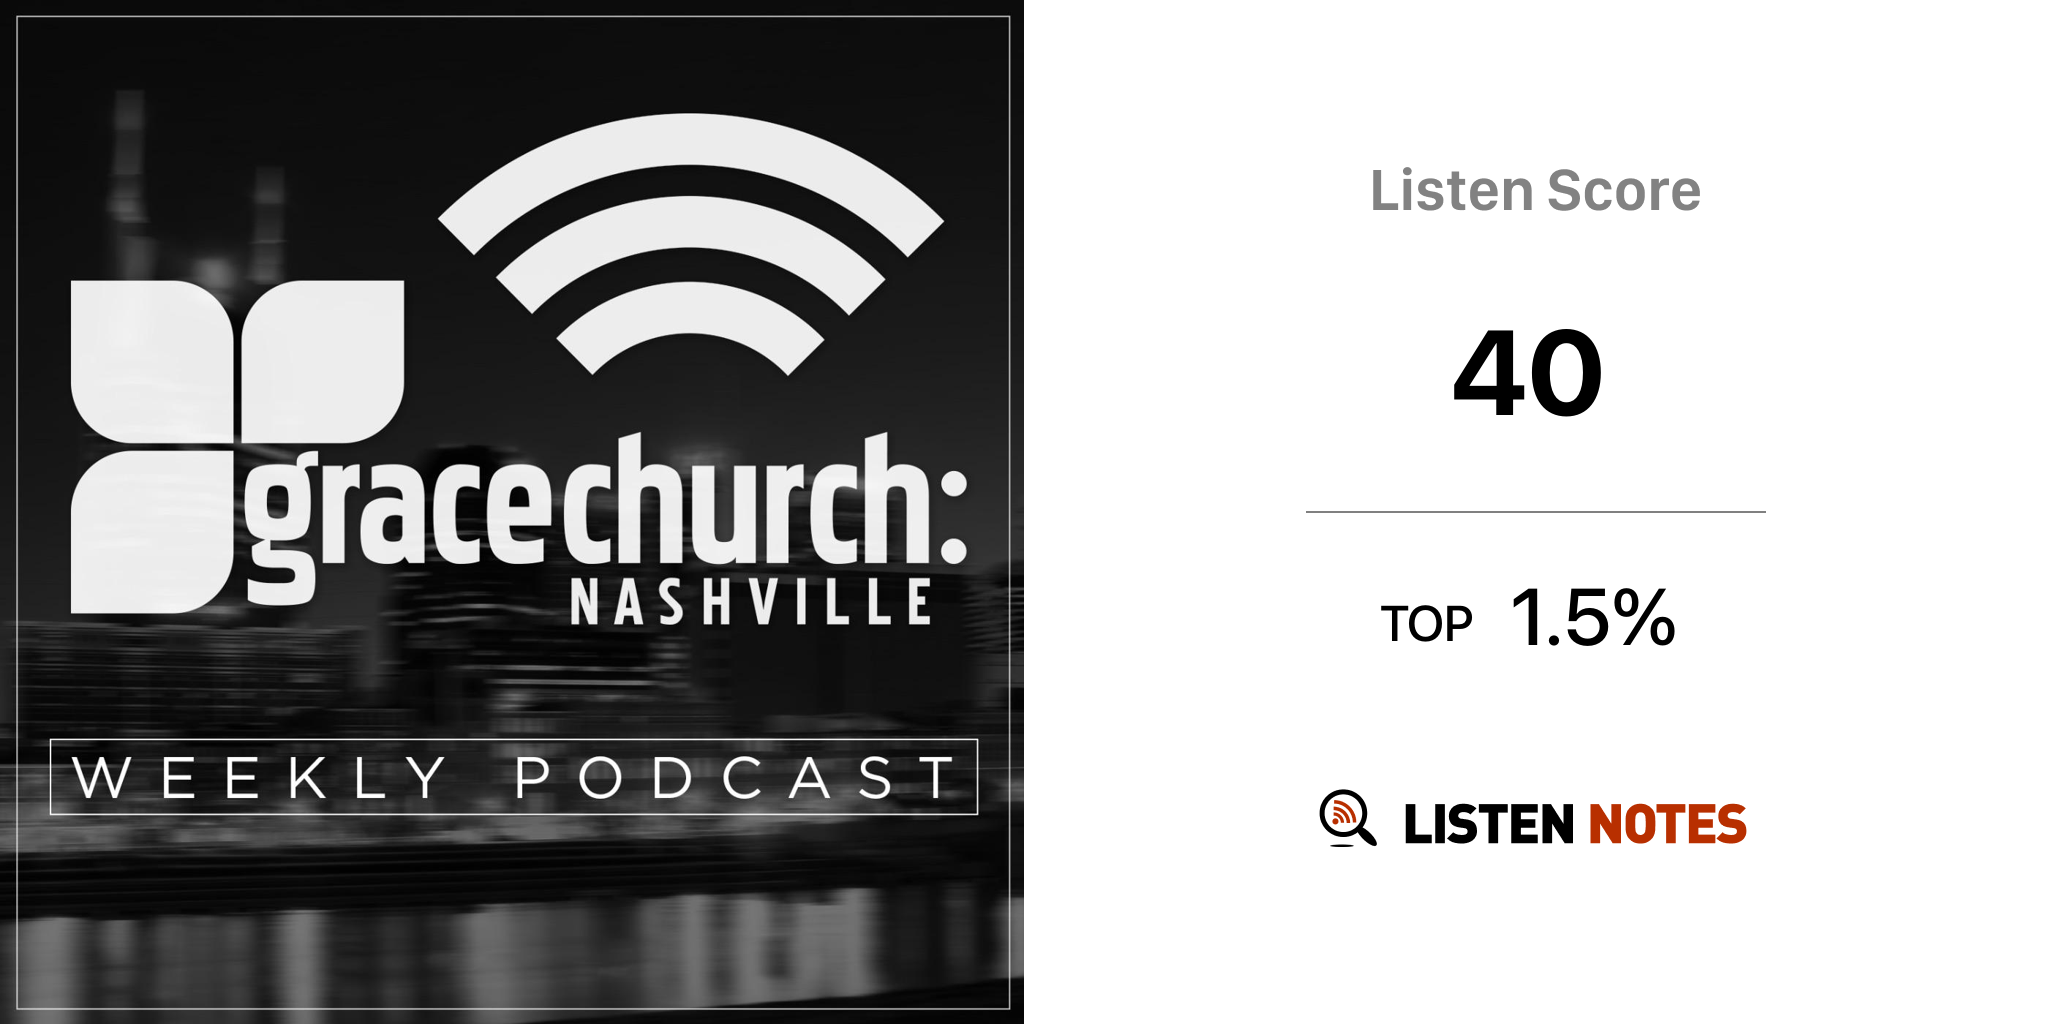 Grace Church Nashville Podcast With Lindell Cooley | Listen Notes